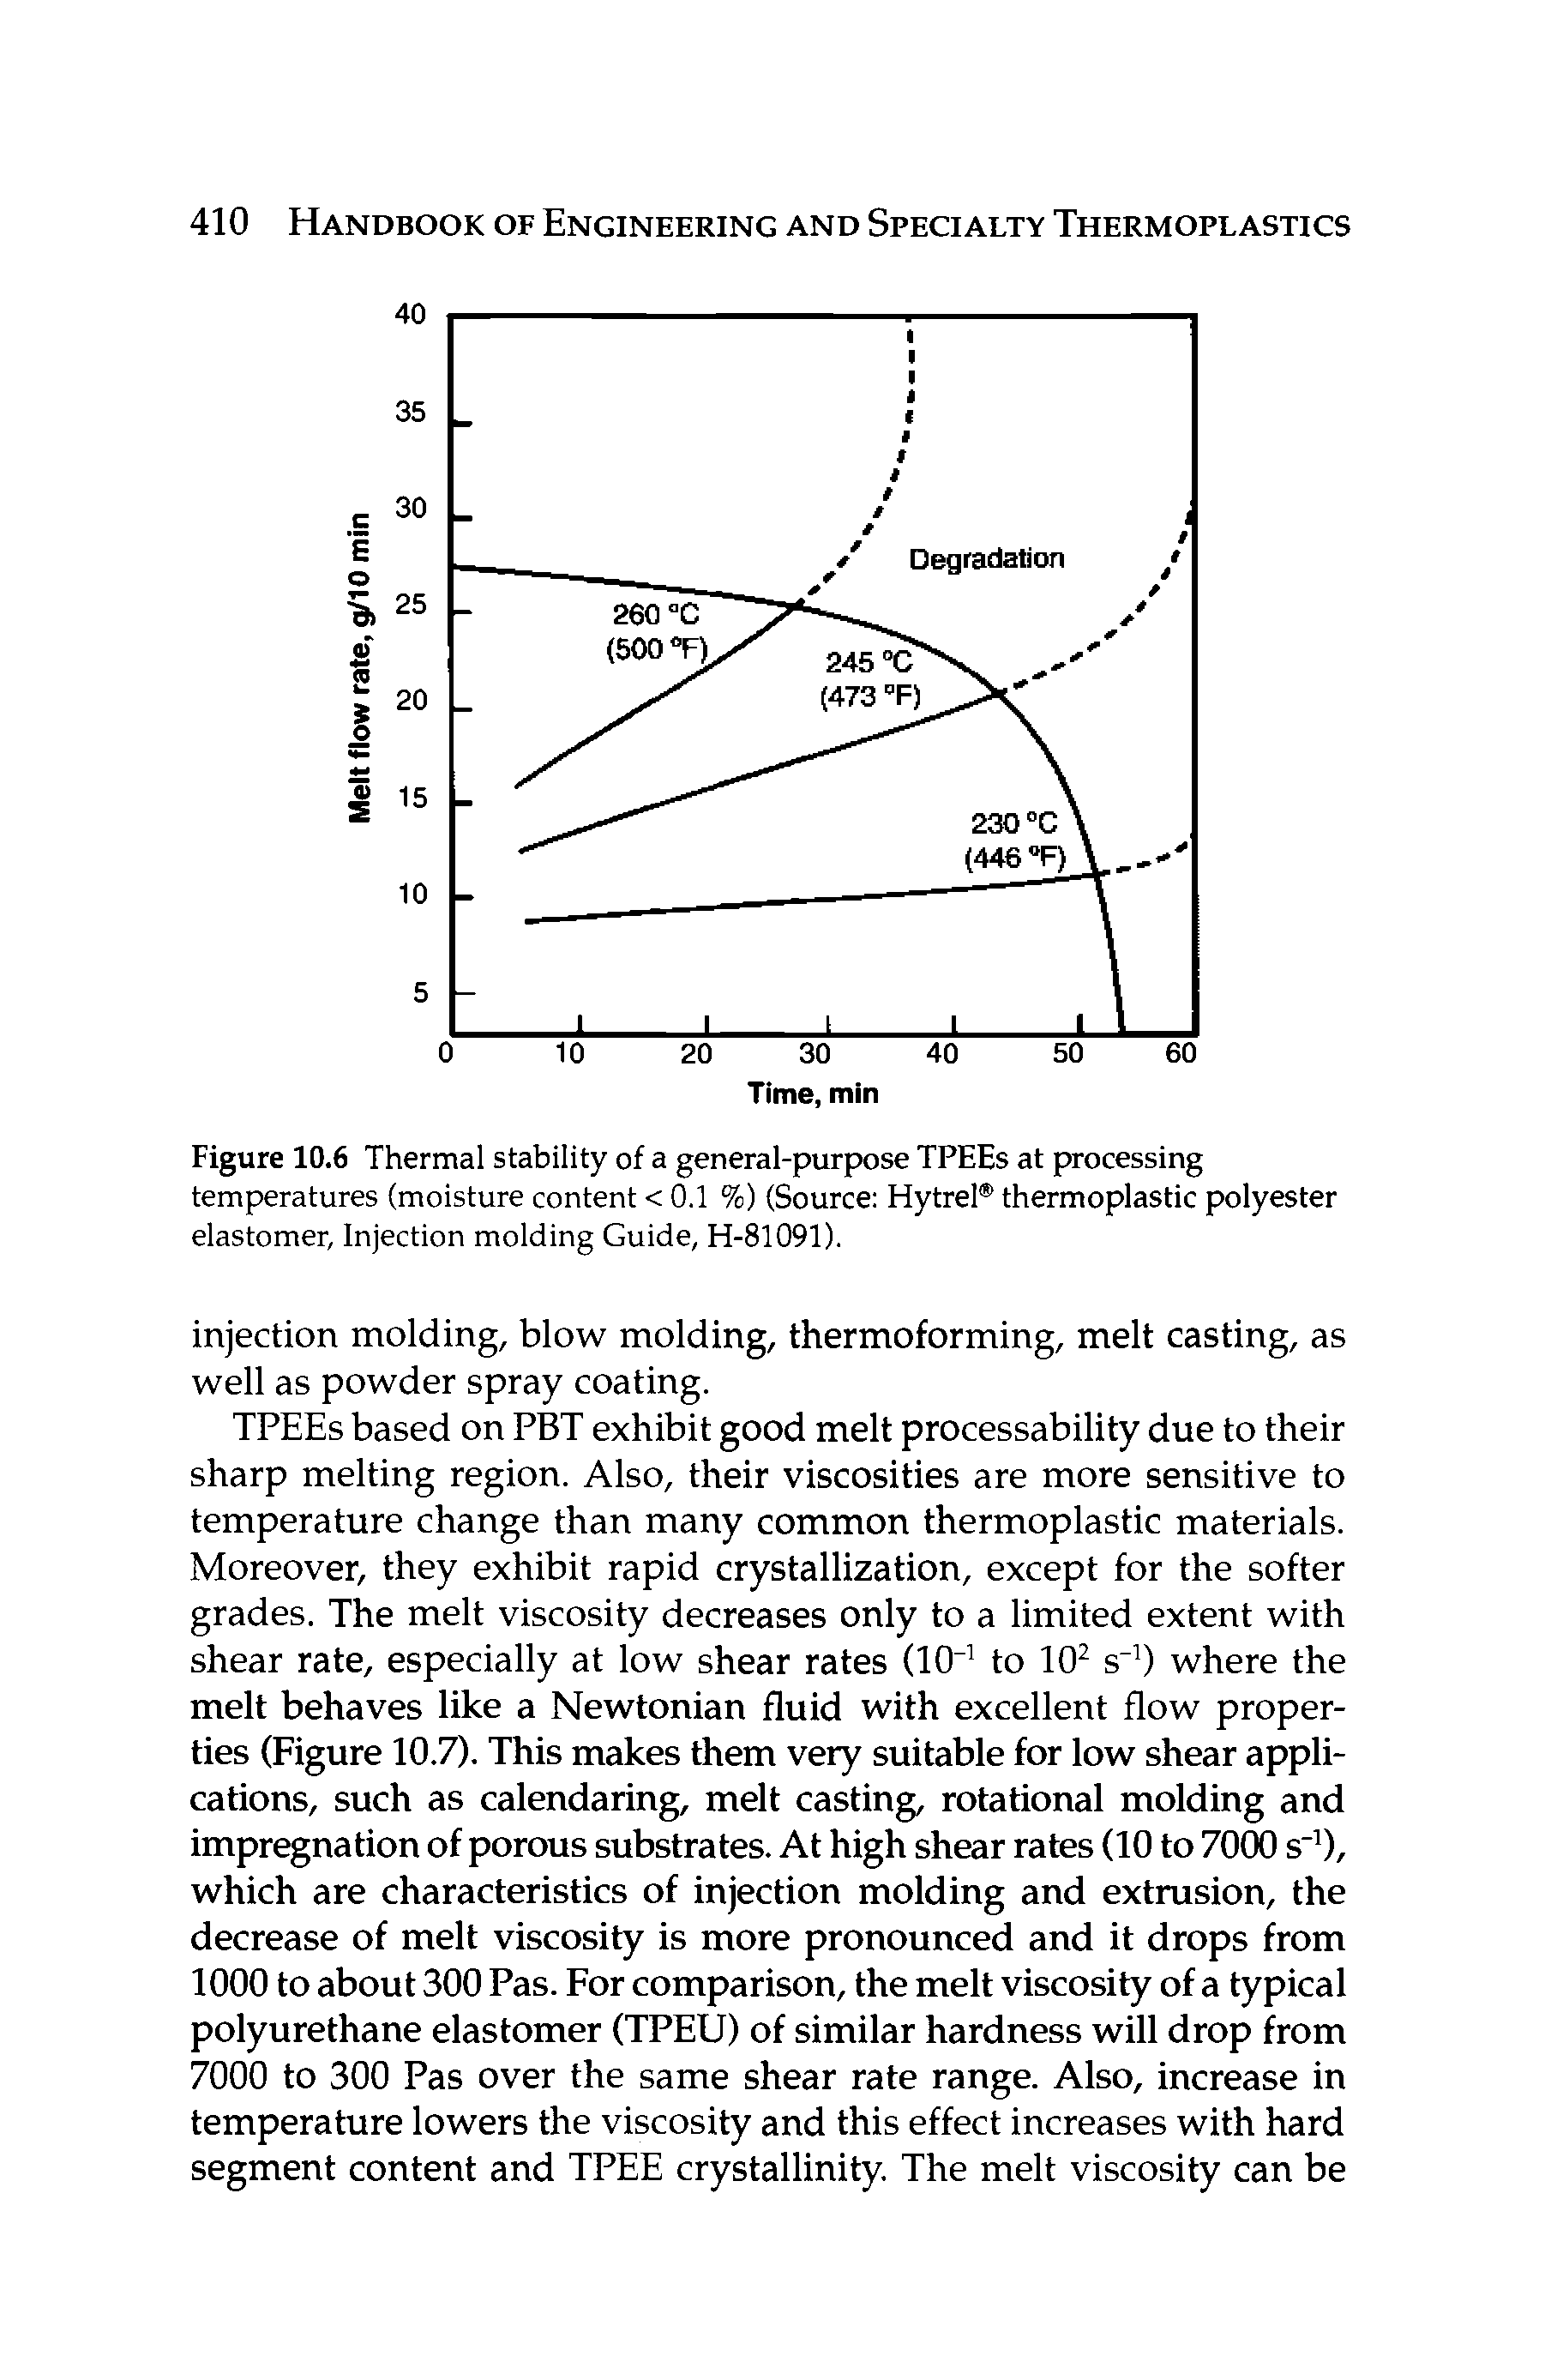 Figure 10.6 Thermal stability of a general-purpose TPEEs at processing temperatures (moisture content < 0.1 %) (Source Hytrel thermoplastic polyester elastomer. Injection molding Guide, H-81091).